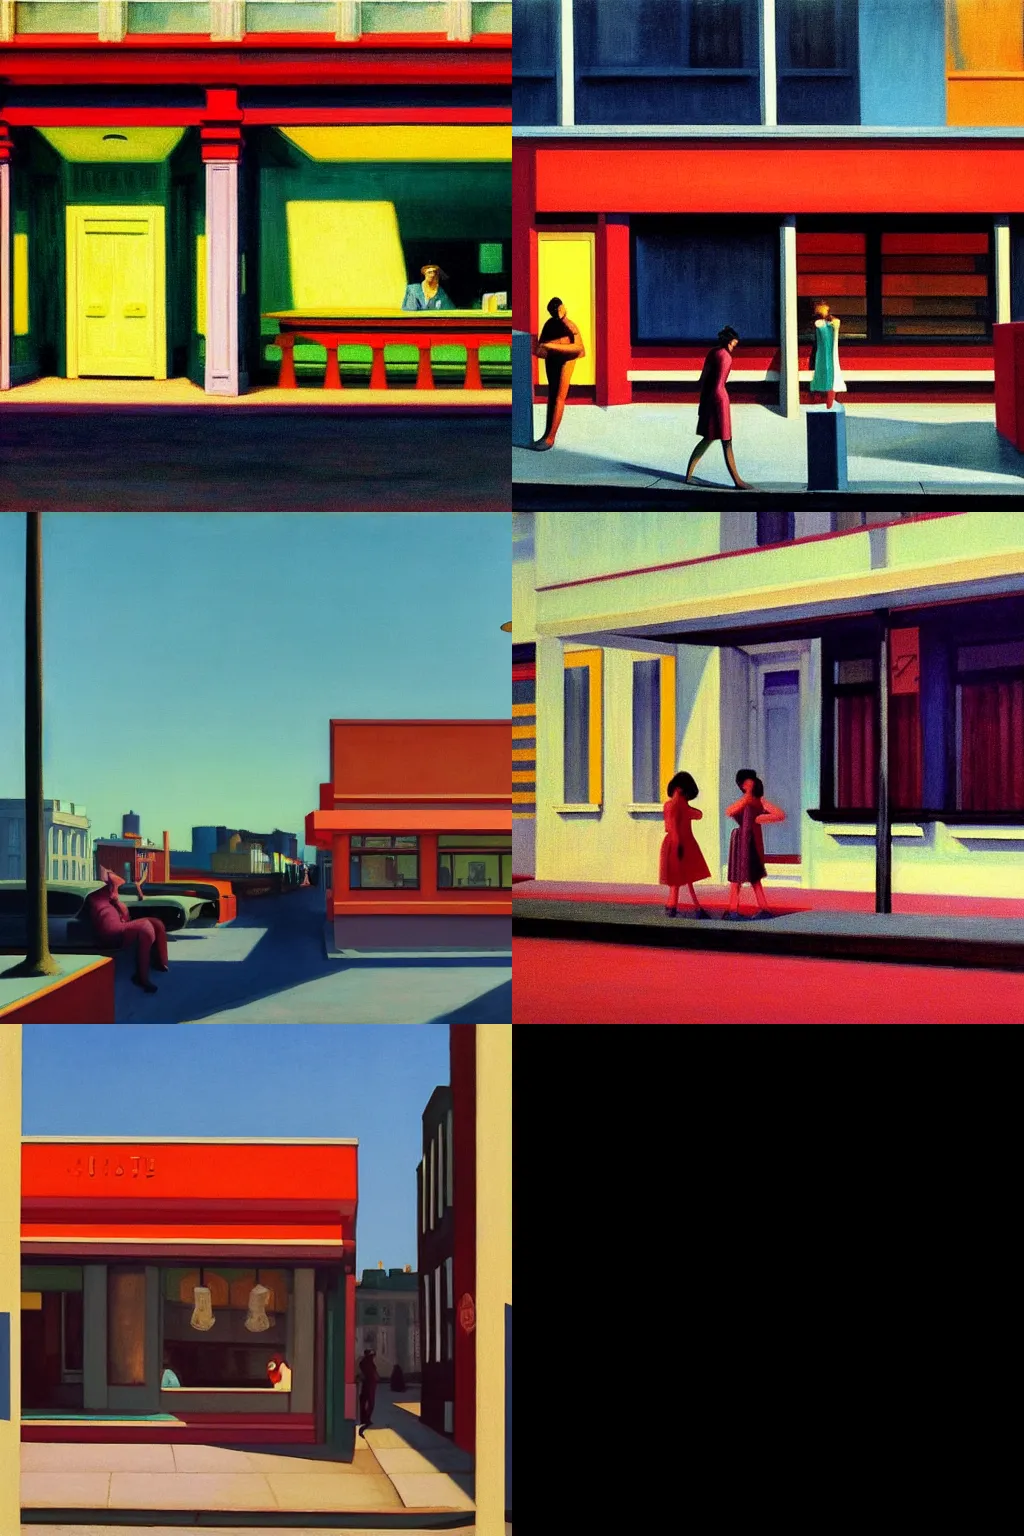 Prompt: A synthwave street scene painted by Edward Hopper